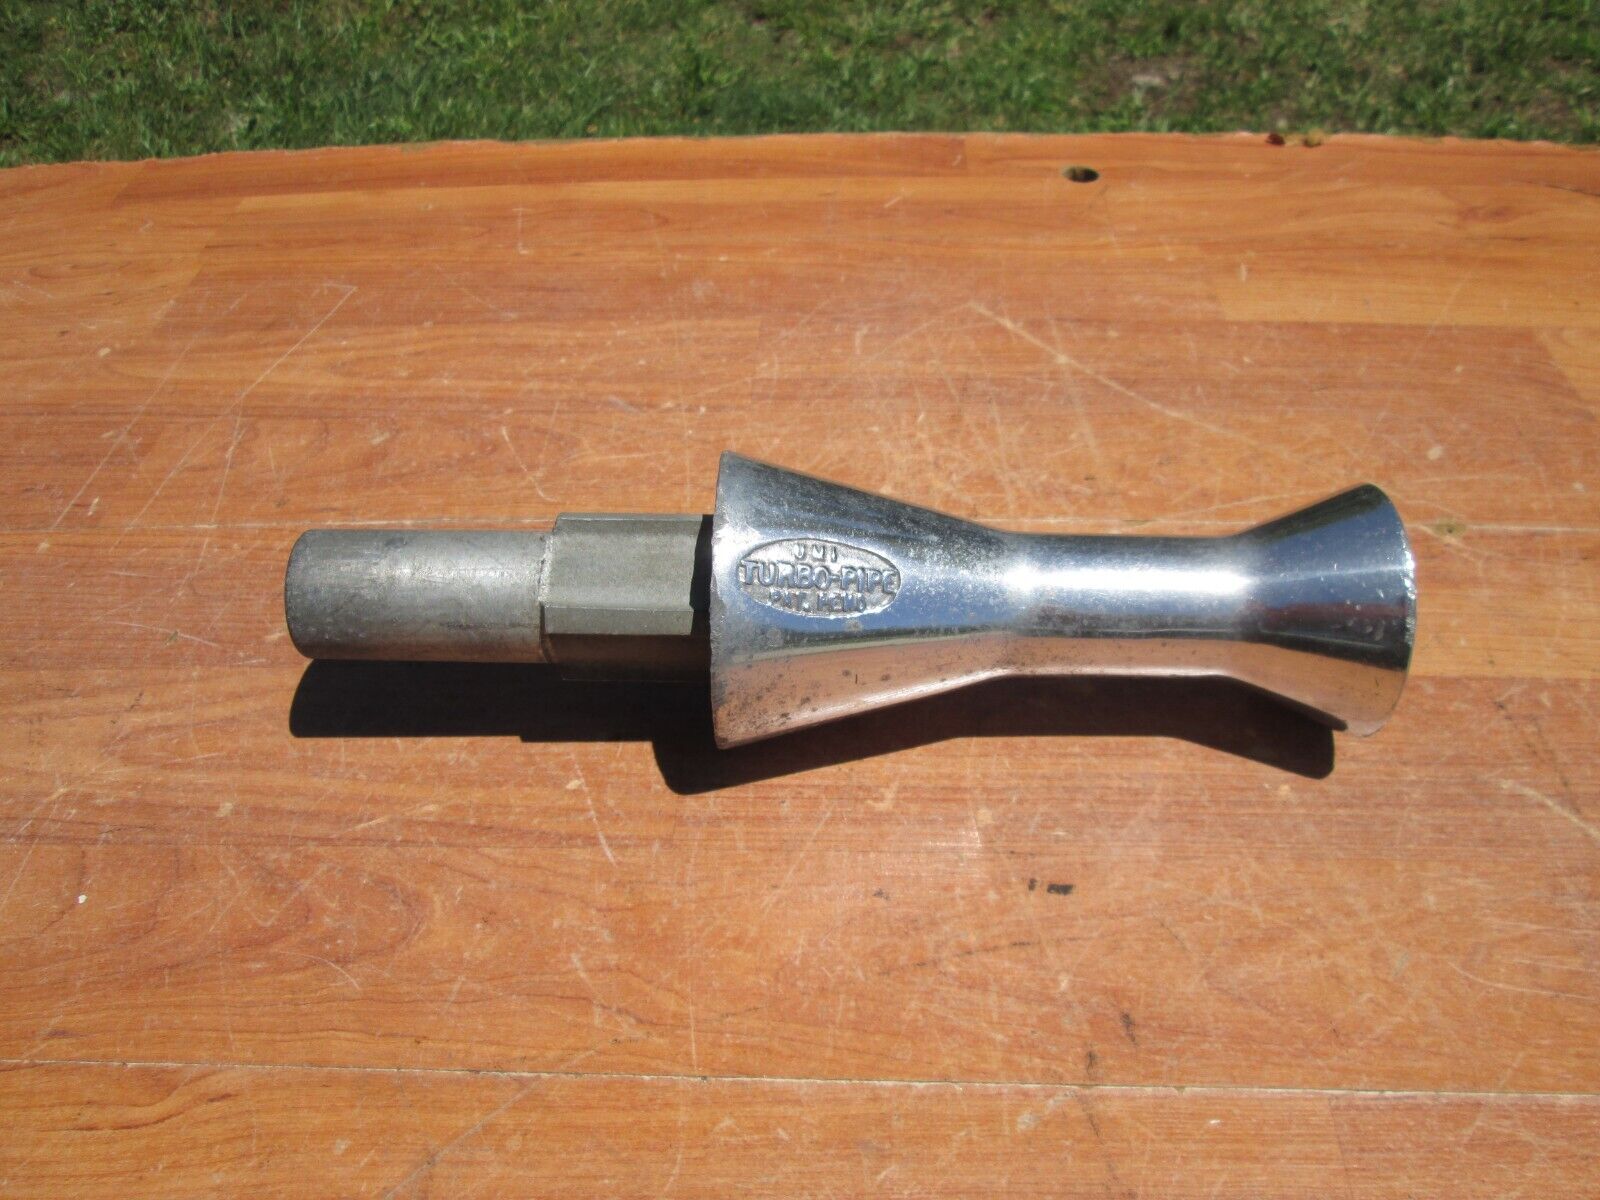 VINTAGE 60s 70s UMI ALUMINUM TURBO EXHAUST TAILPIPE ACCESSORY VW?